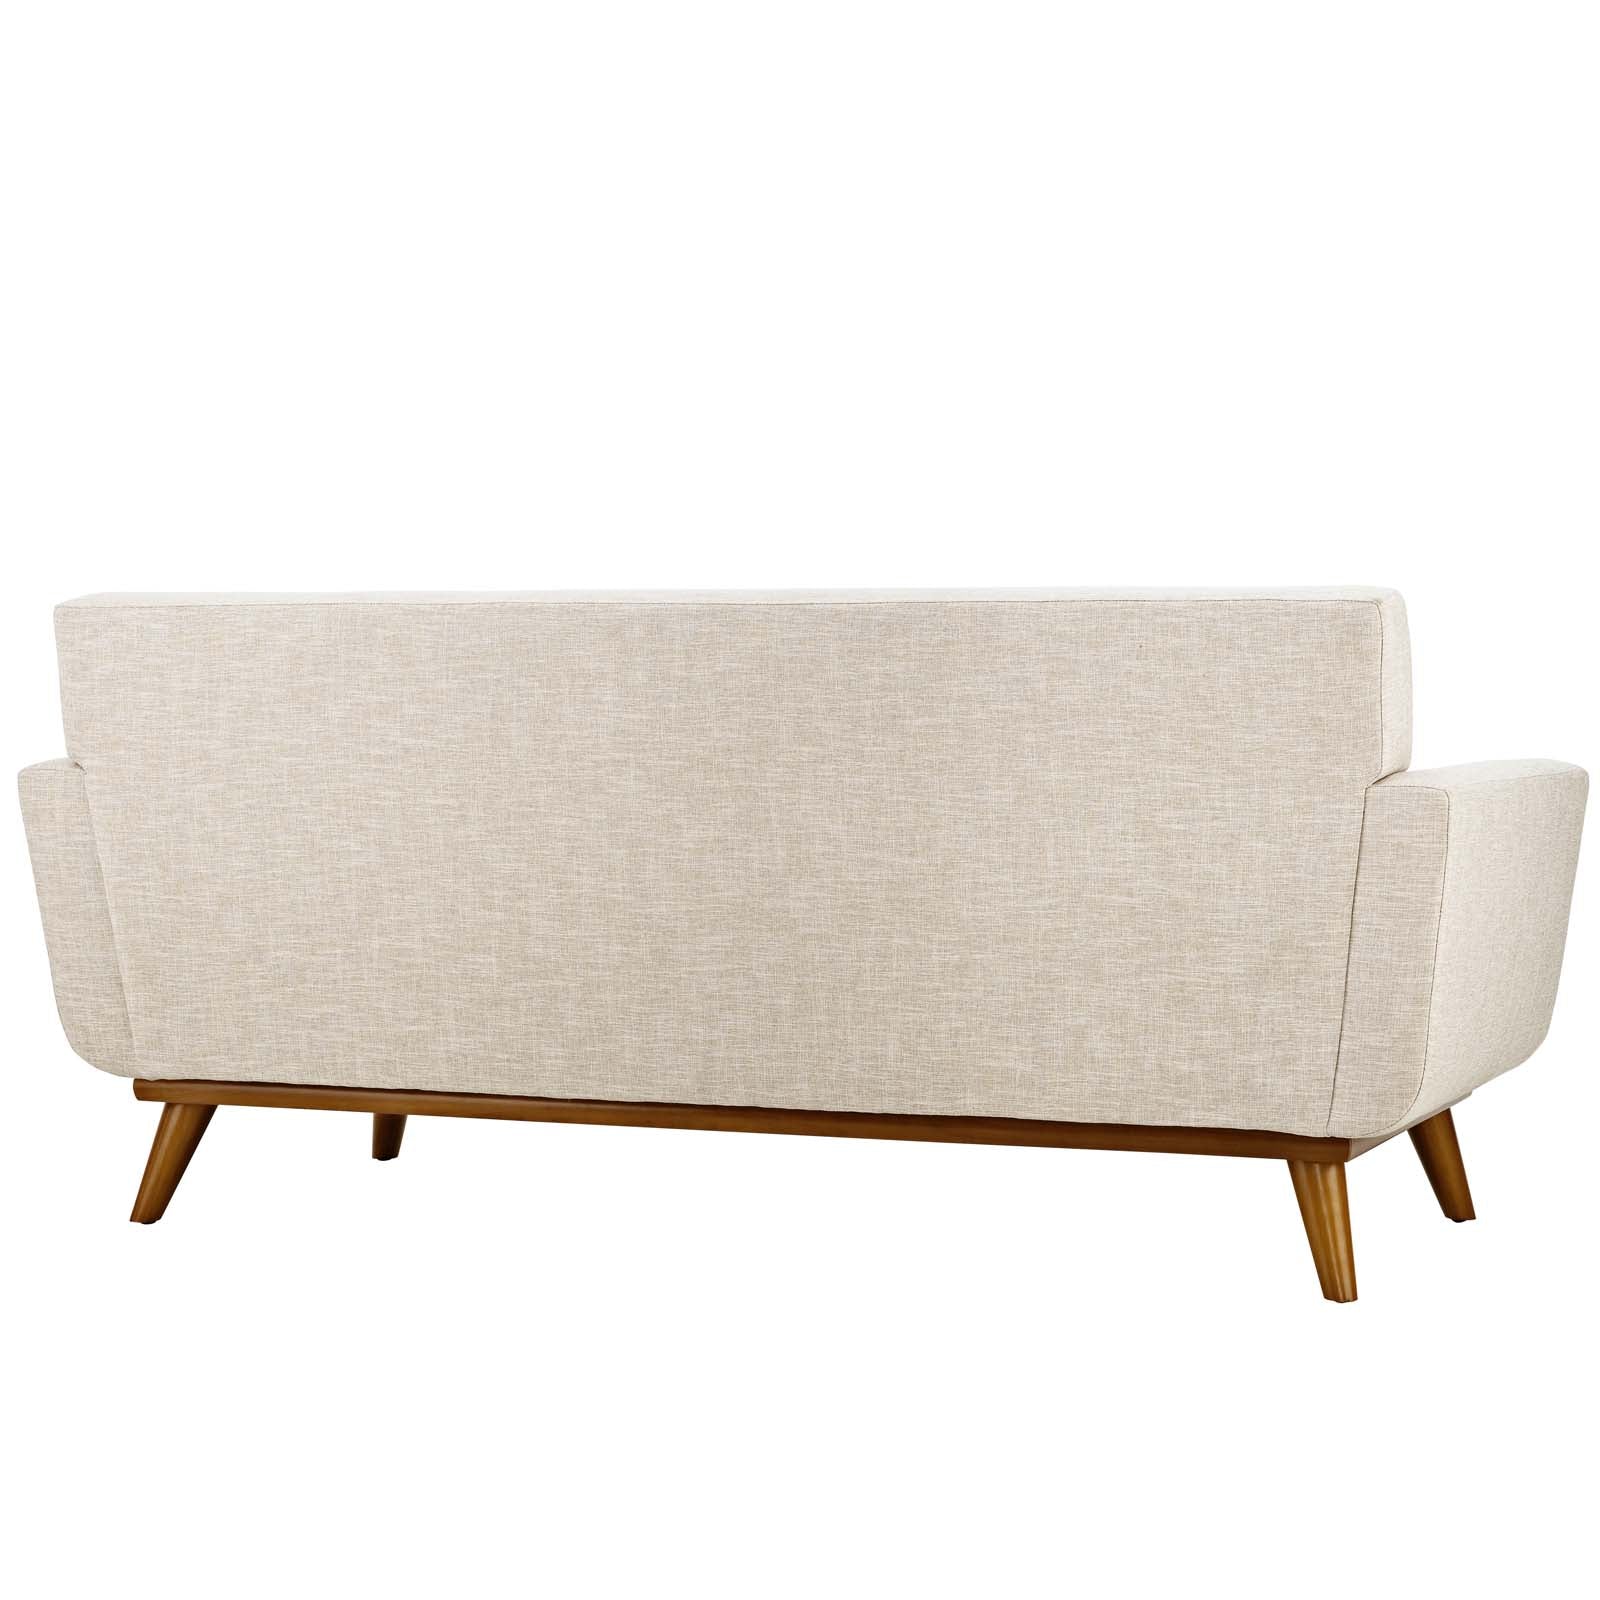 Modway Living Room Sets - Engage Loveseat and Sofa Beige ( Set of 2 )